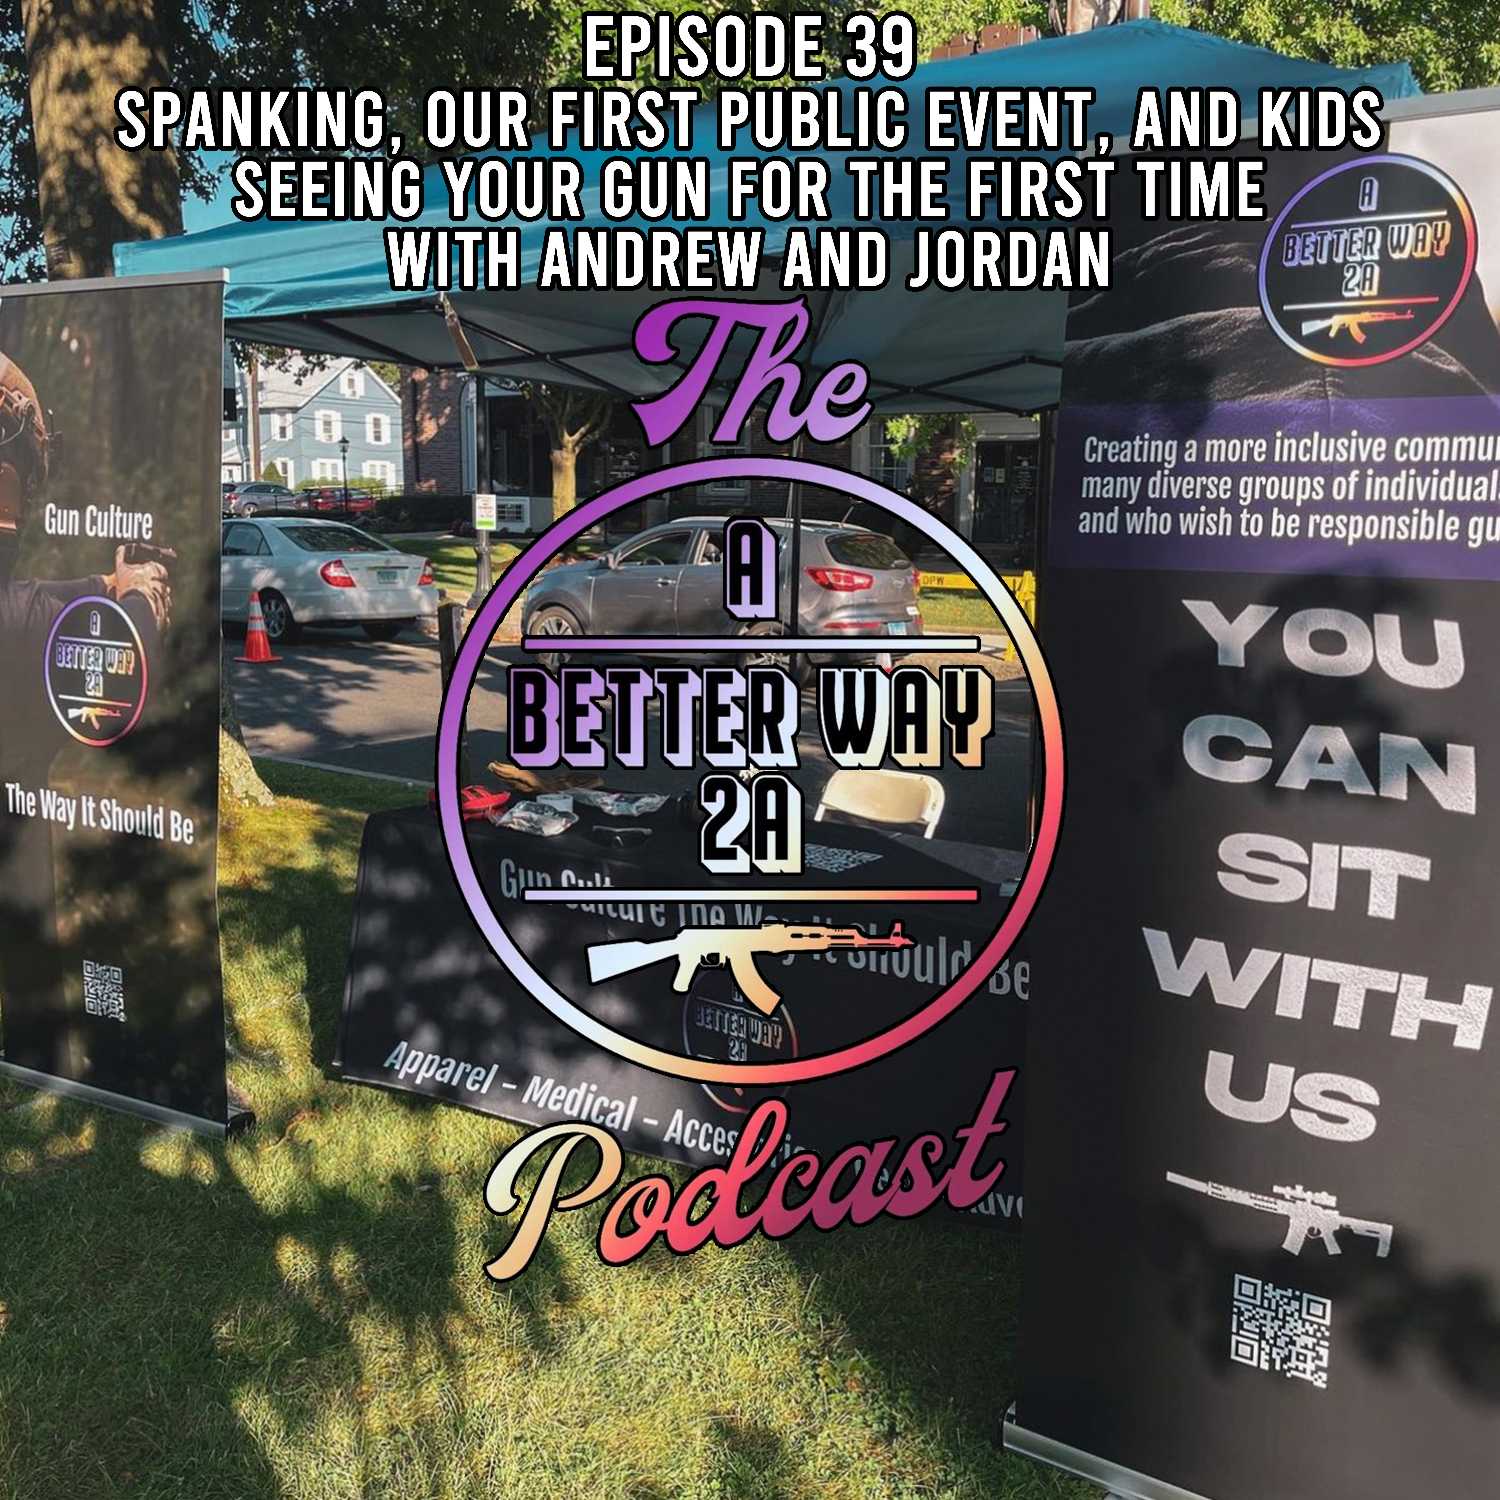 Episode 39 - Spanking, Our First Public Event, And Kids Seeing Your Gun For The First Time with Andrew and Jordan